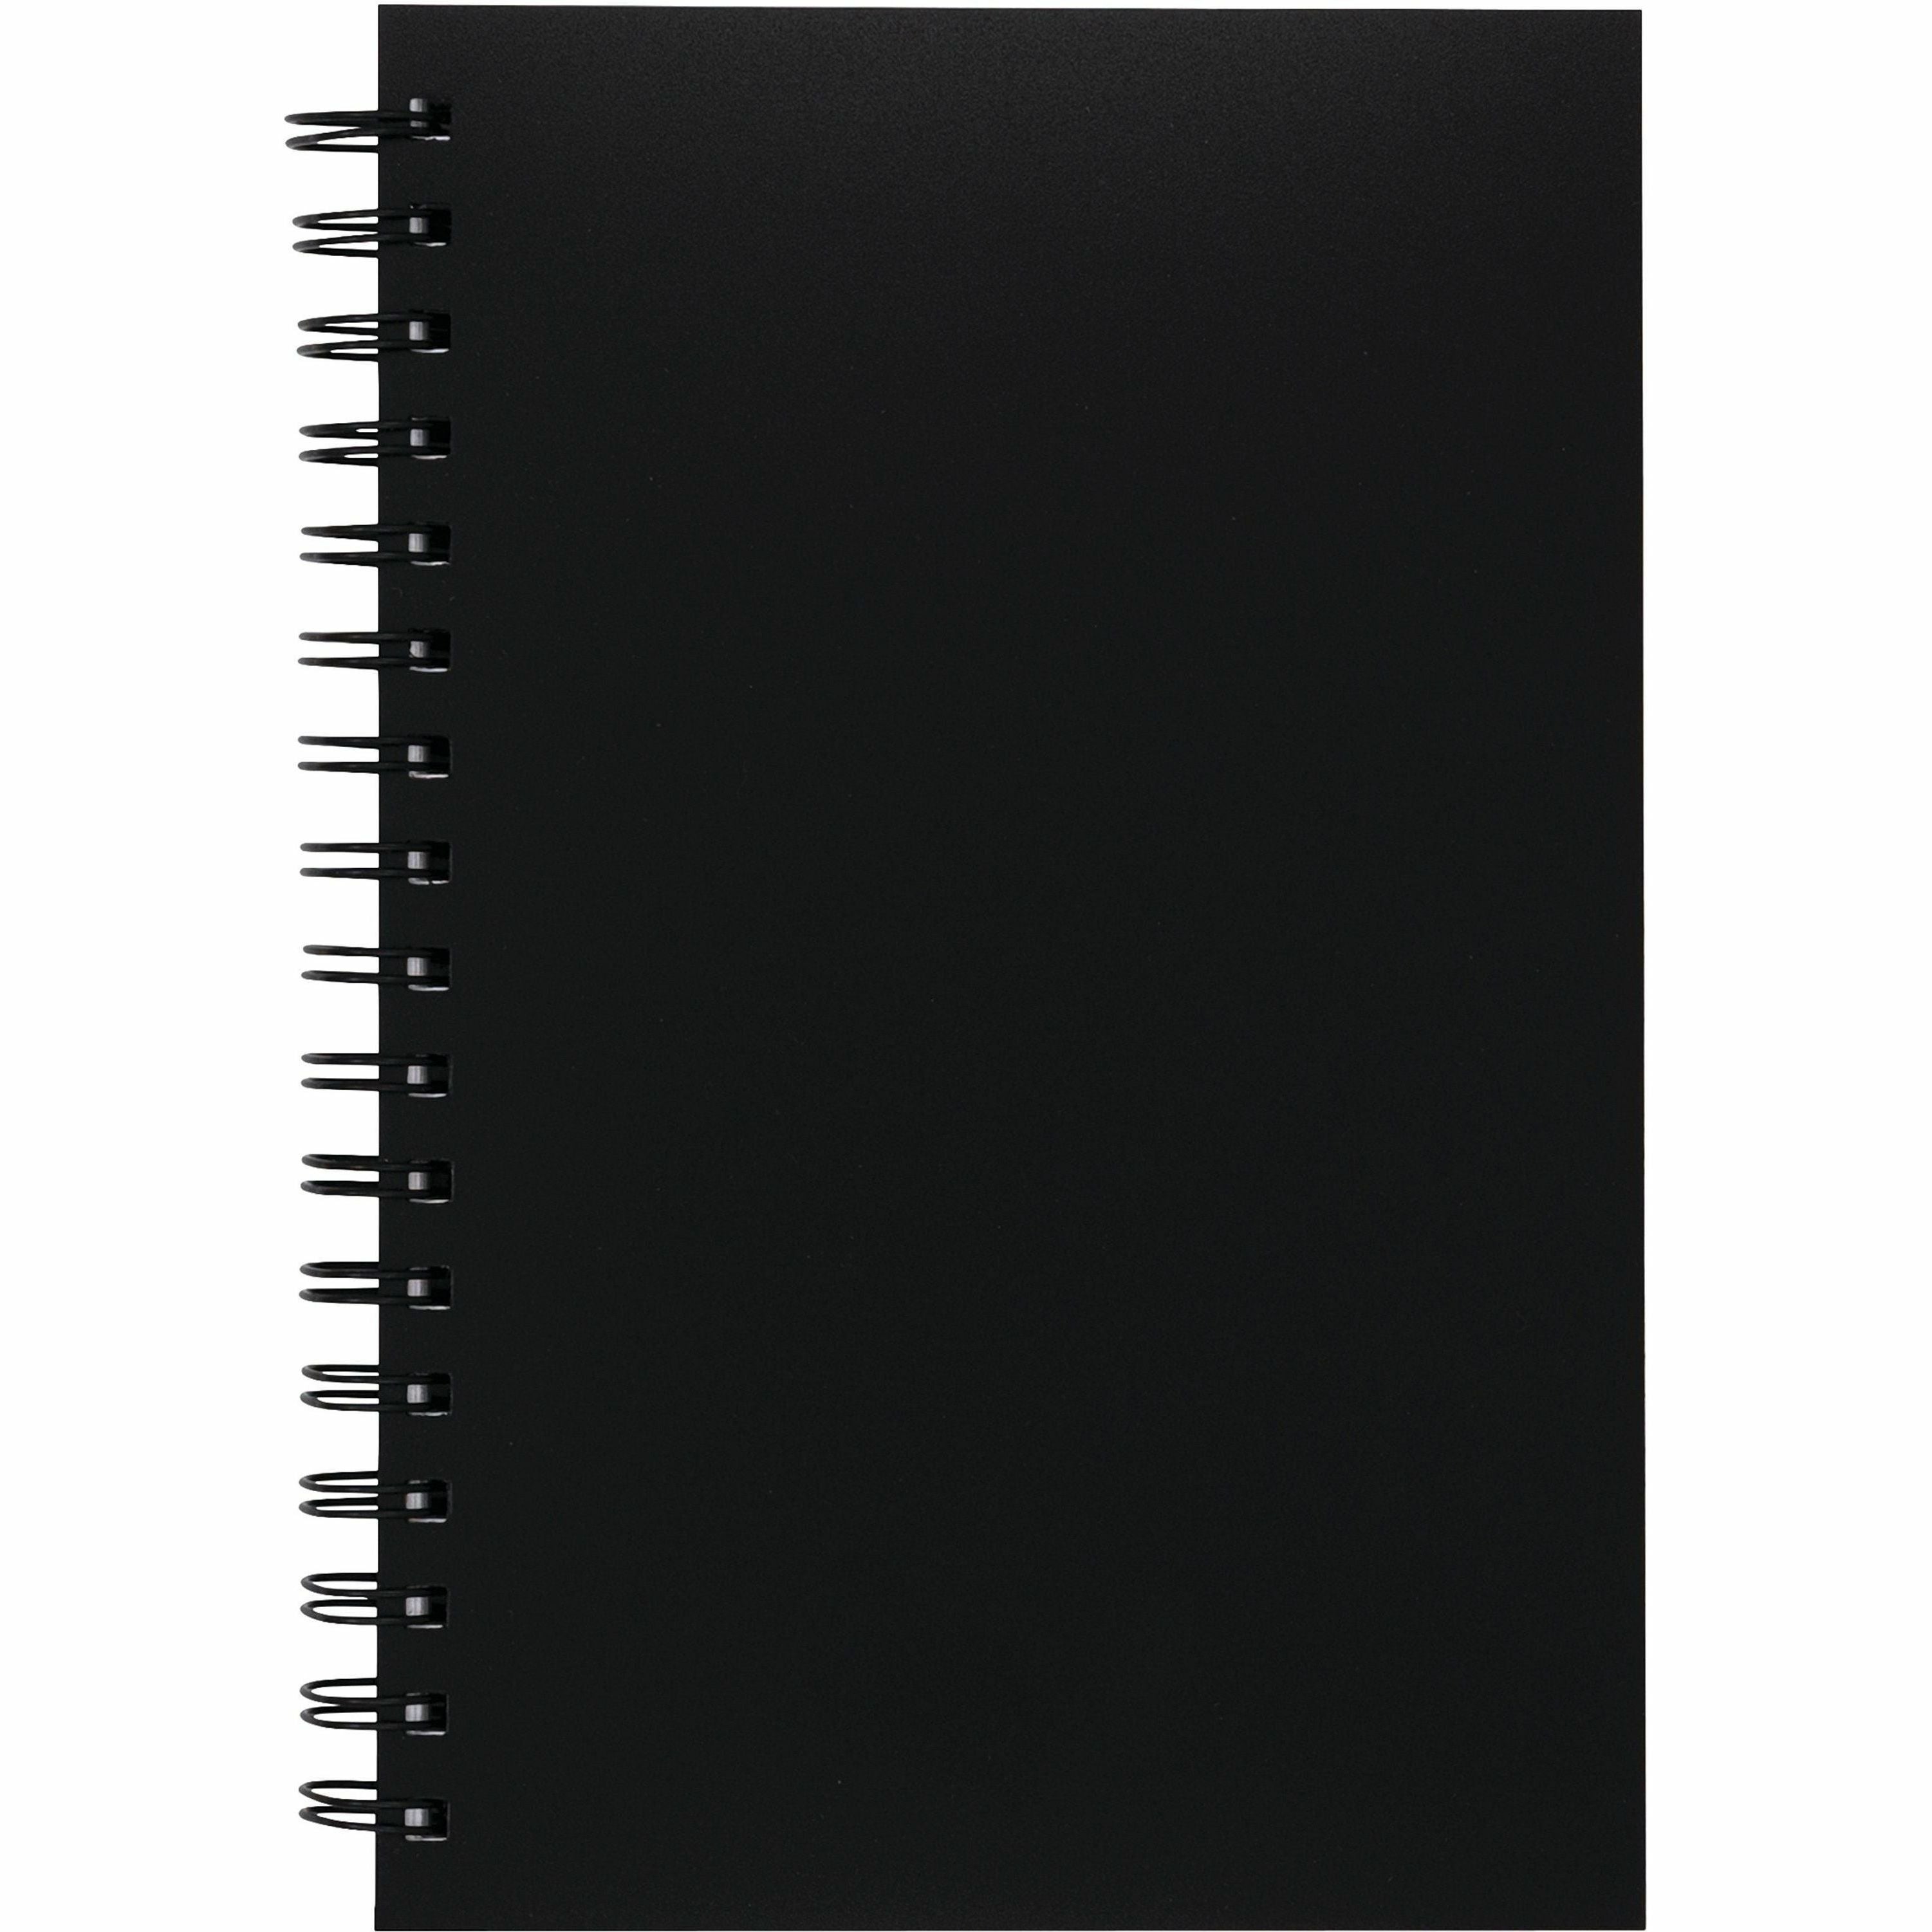 ucreate-poly-cover-sketch-book-75-sheets-spiral-70-lb-basis-weight-9-x-6-blackpolyurethane-cover-heavyweight-acid-free-paper-durable-cover-perforated-1-each_pacpcar37089 - 2